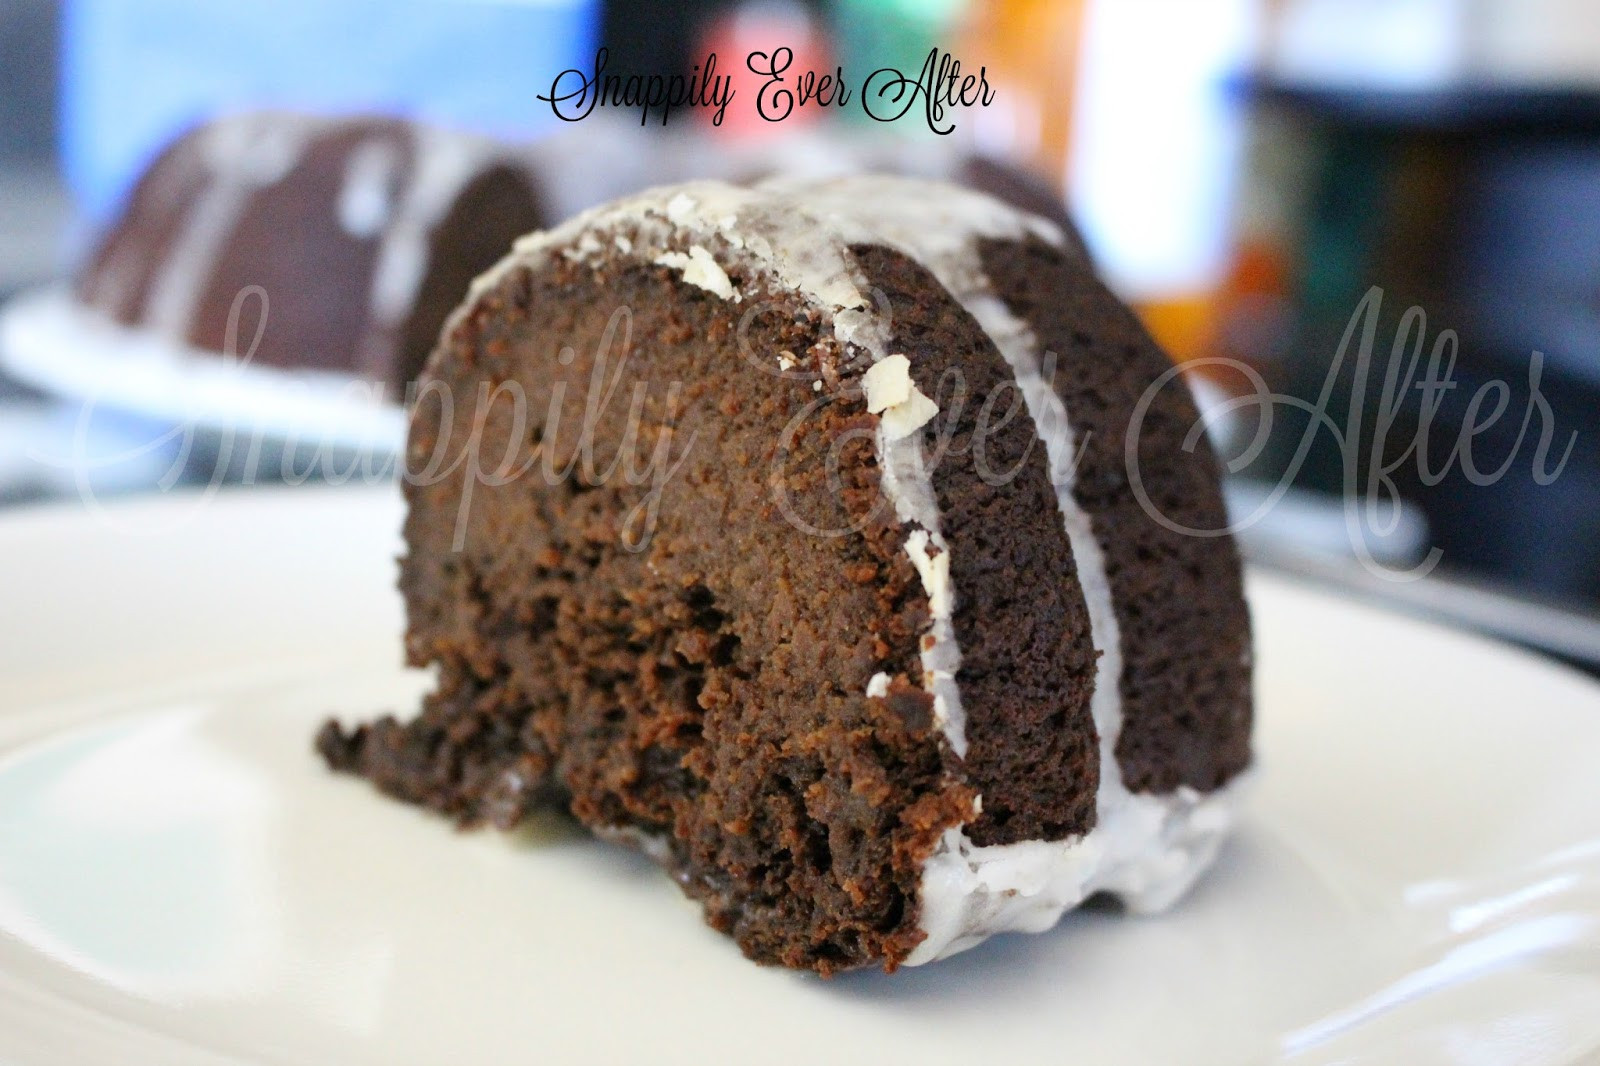 Healthy Pumpkin Chocolate Cake
 Snappily Ever After Healthy Chocolate Pumpkin Cake